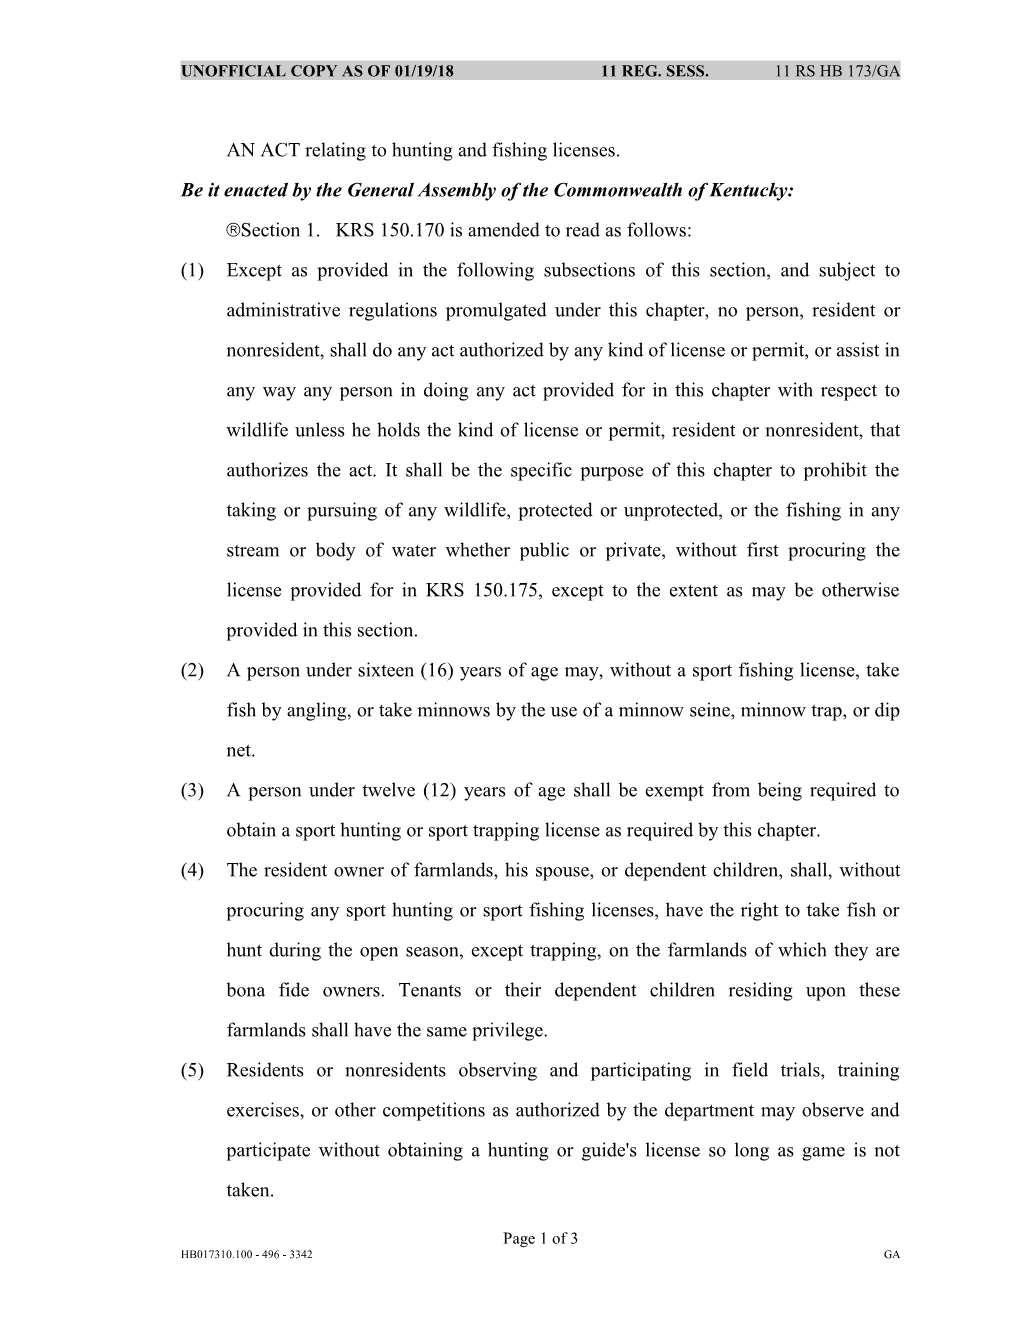 AN ACT Relating to Hunting and Fishing Licenses s1